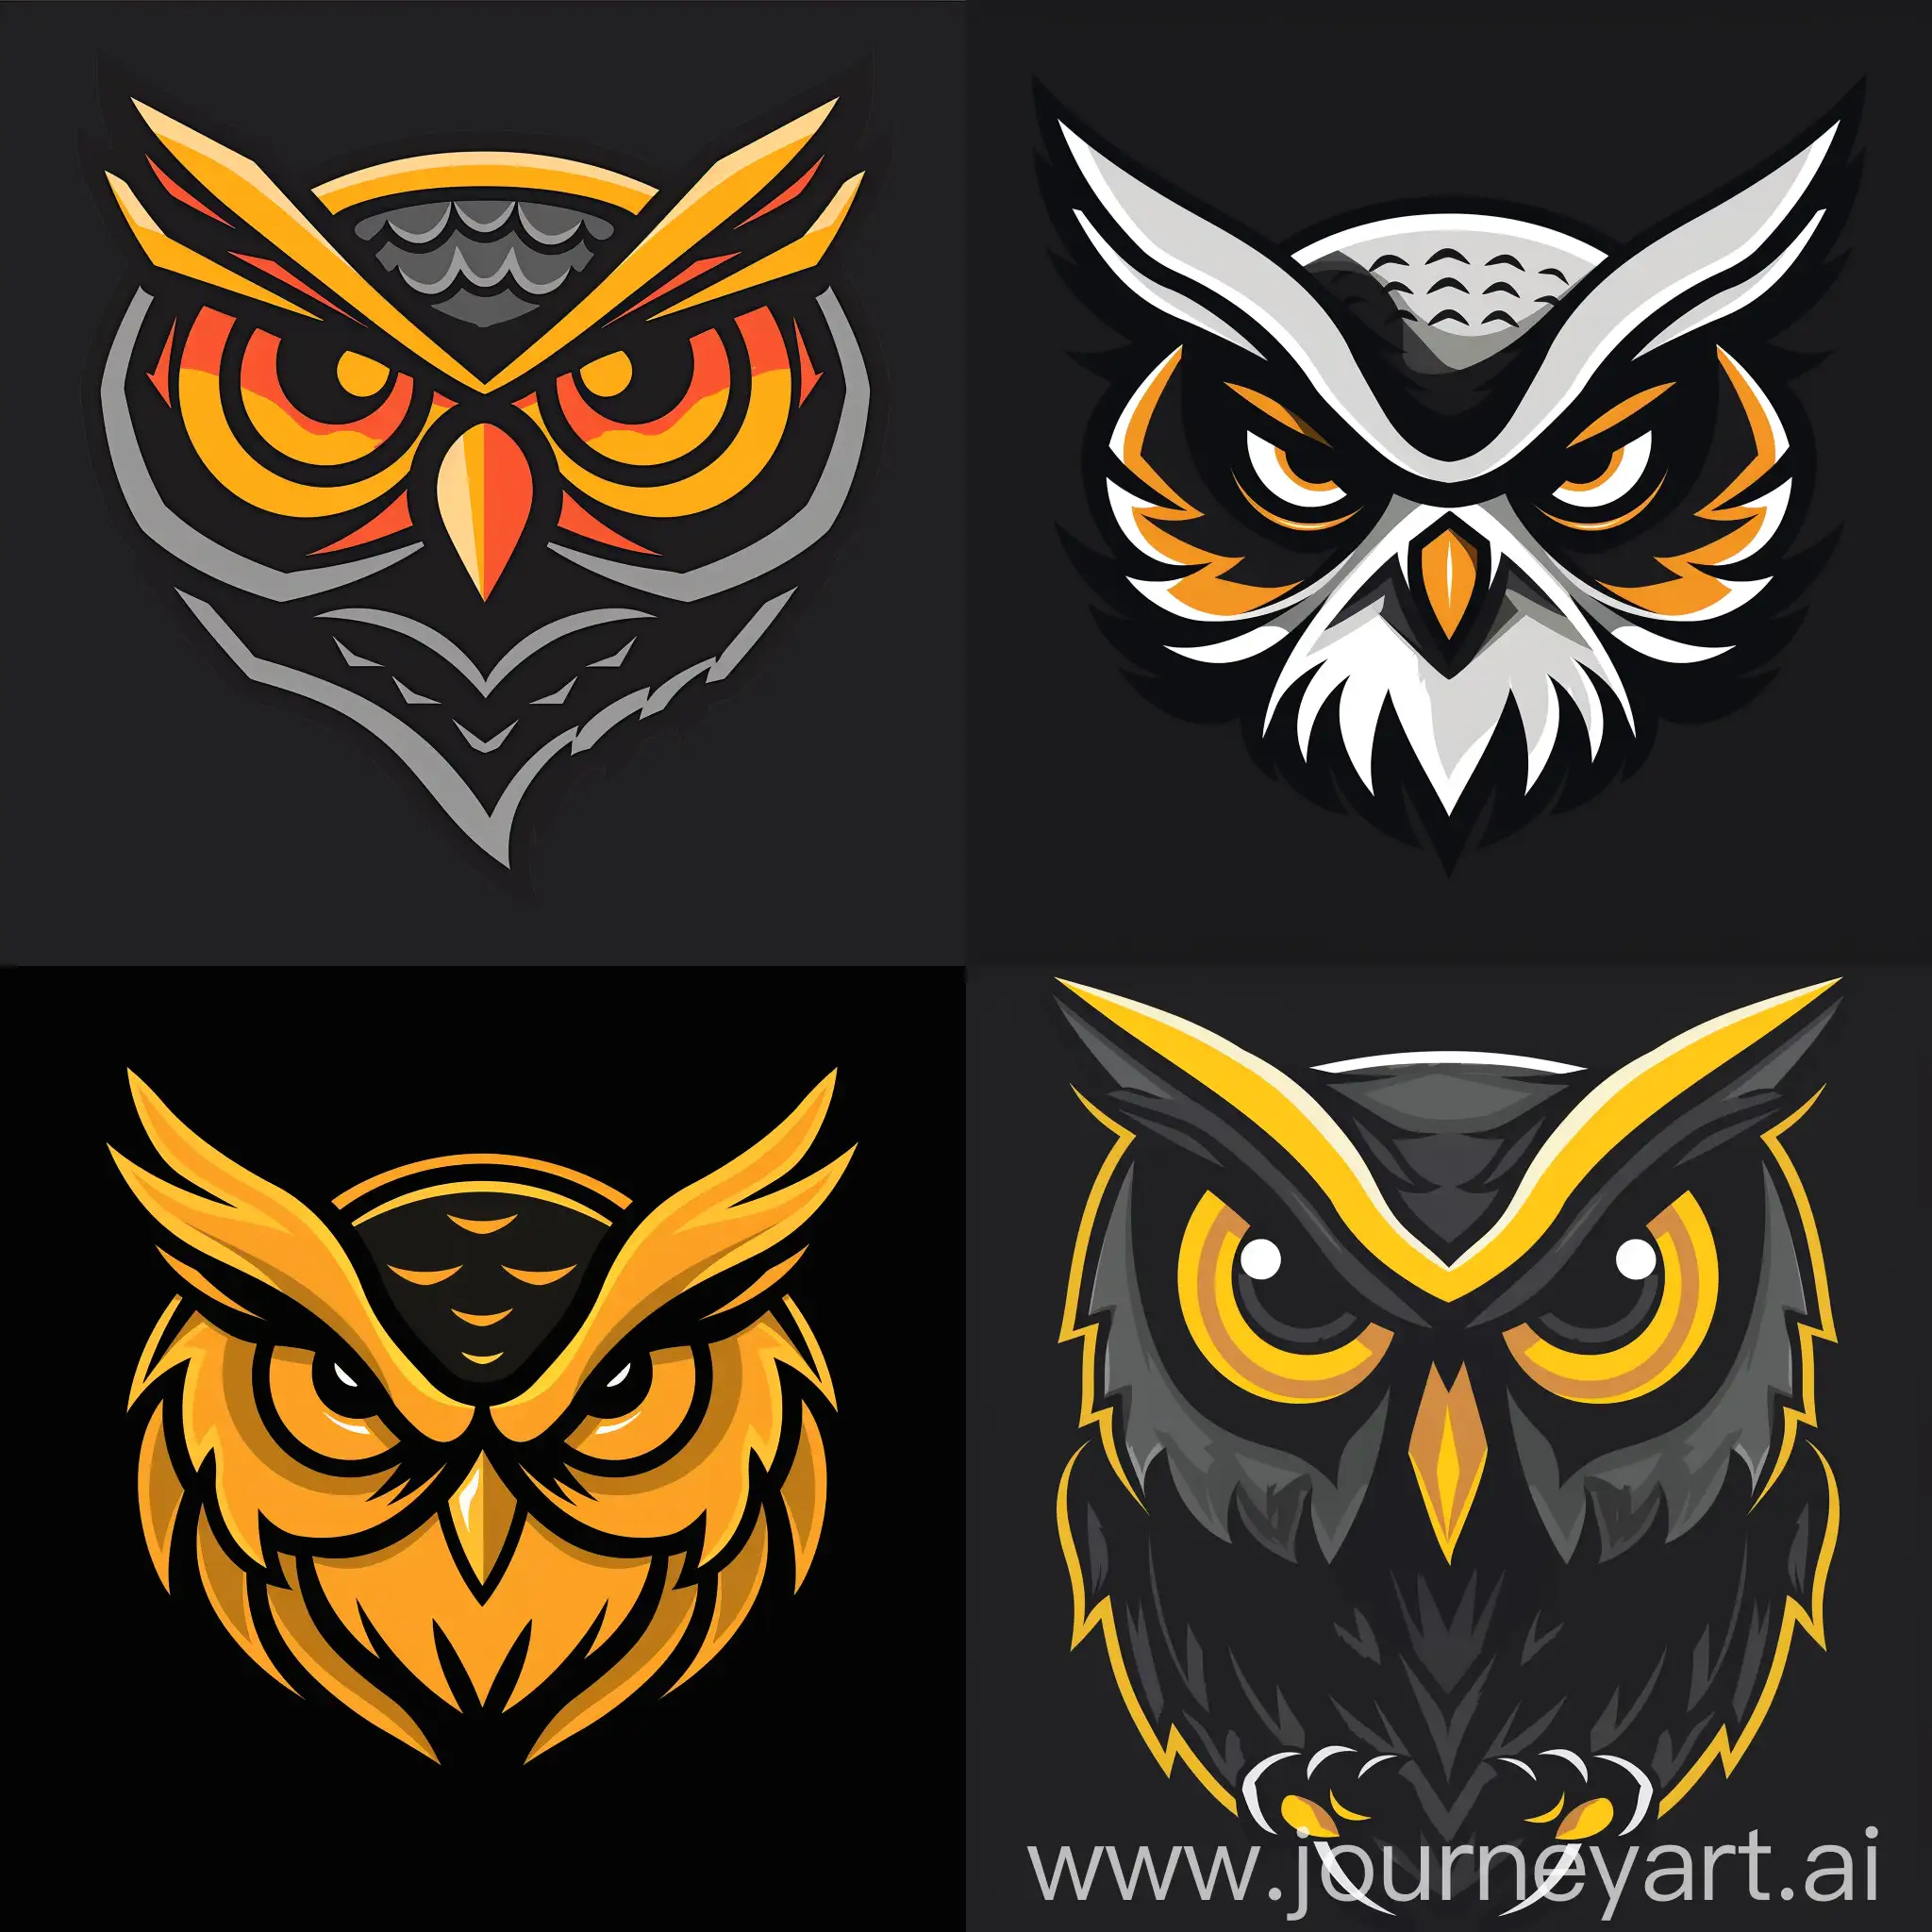 the logo for the YouTube channel in the form of an owl